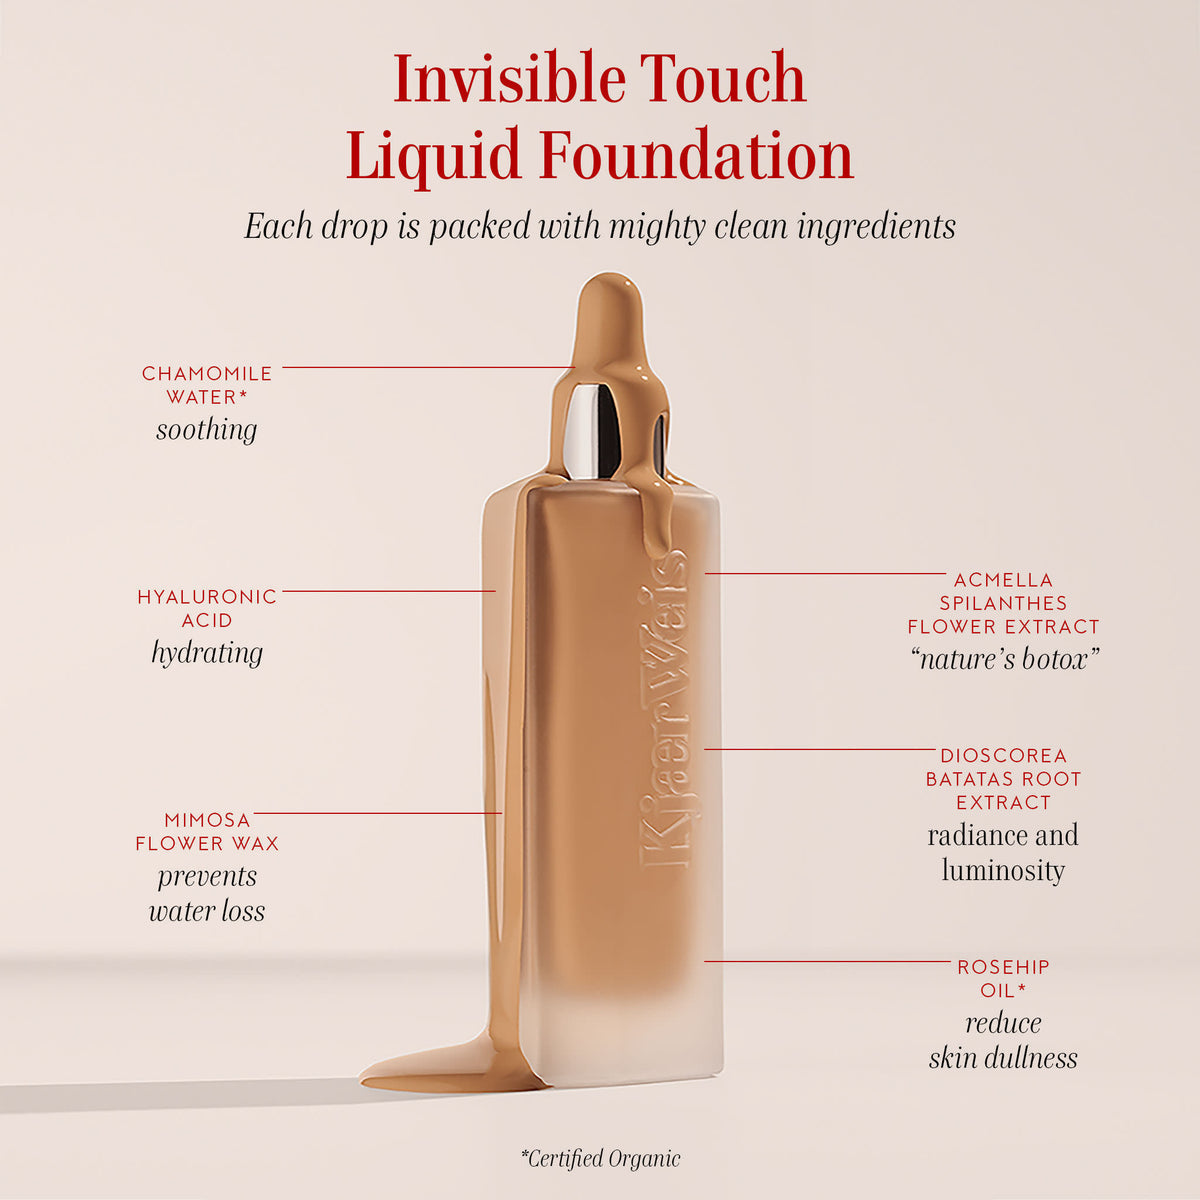 Kjaer Weis Invisible Touch Liquid Foundation . This product is for deep warm beige complexions